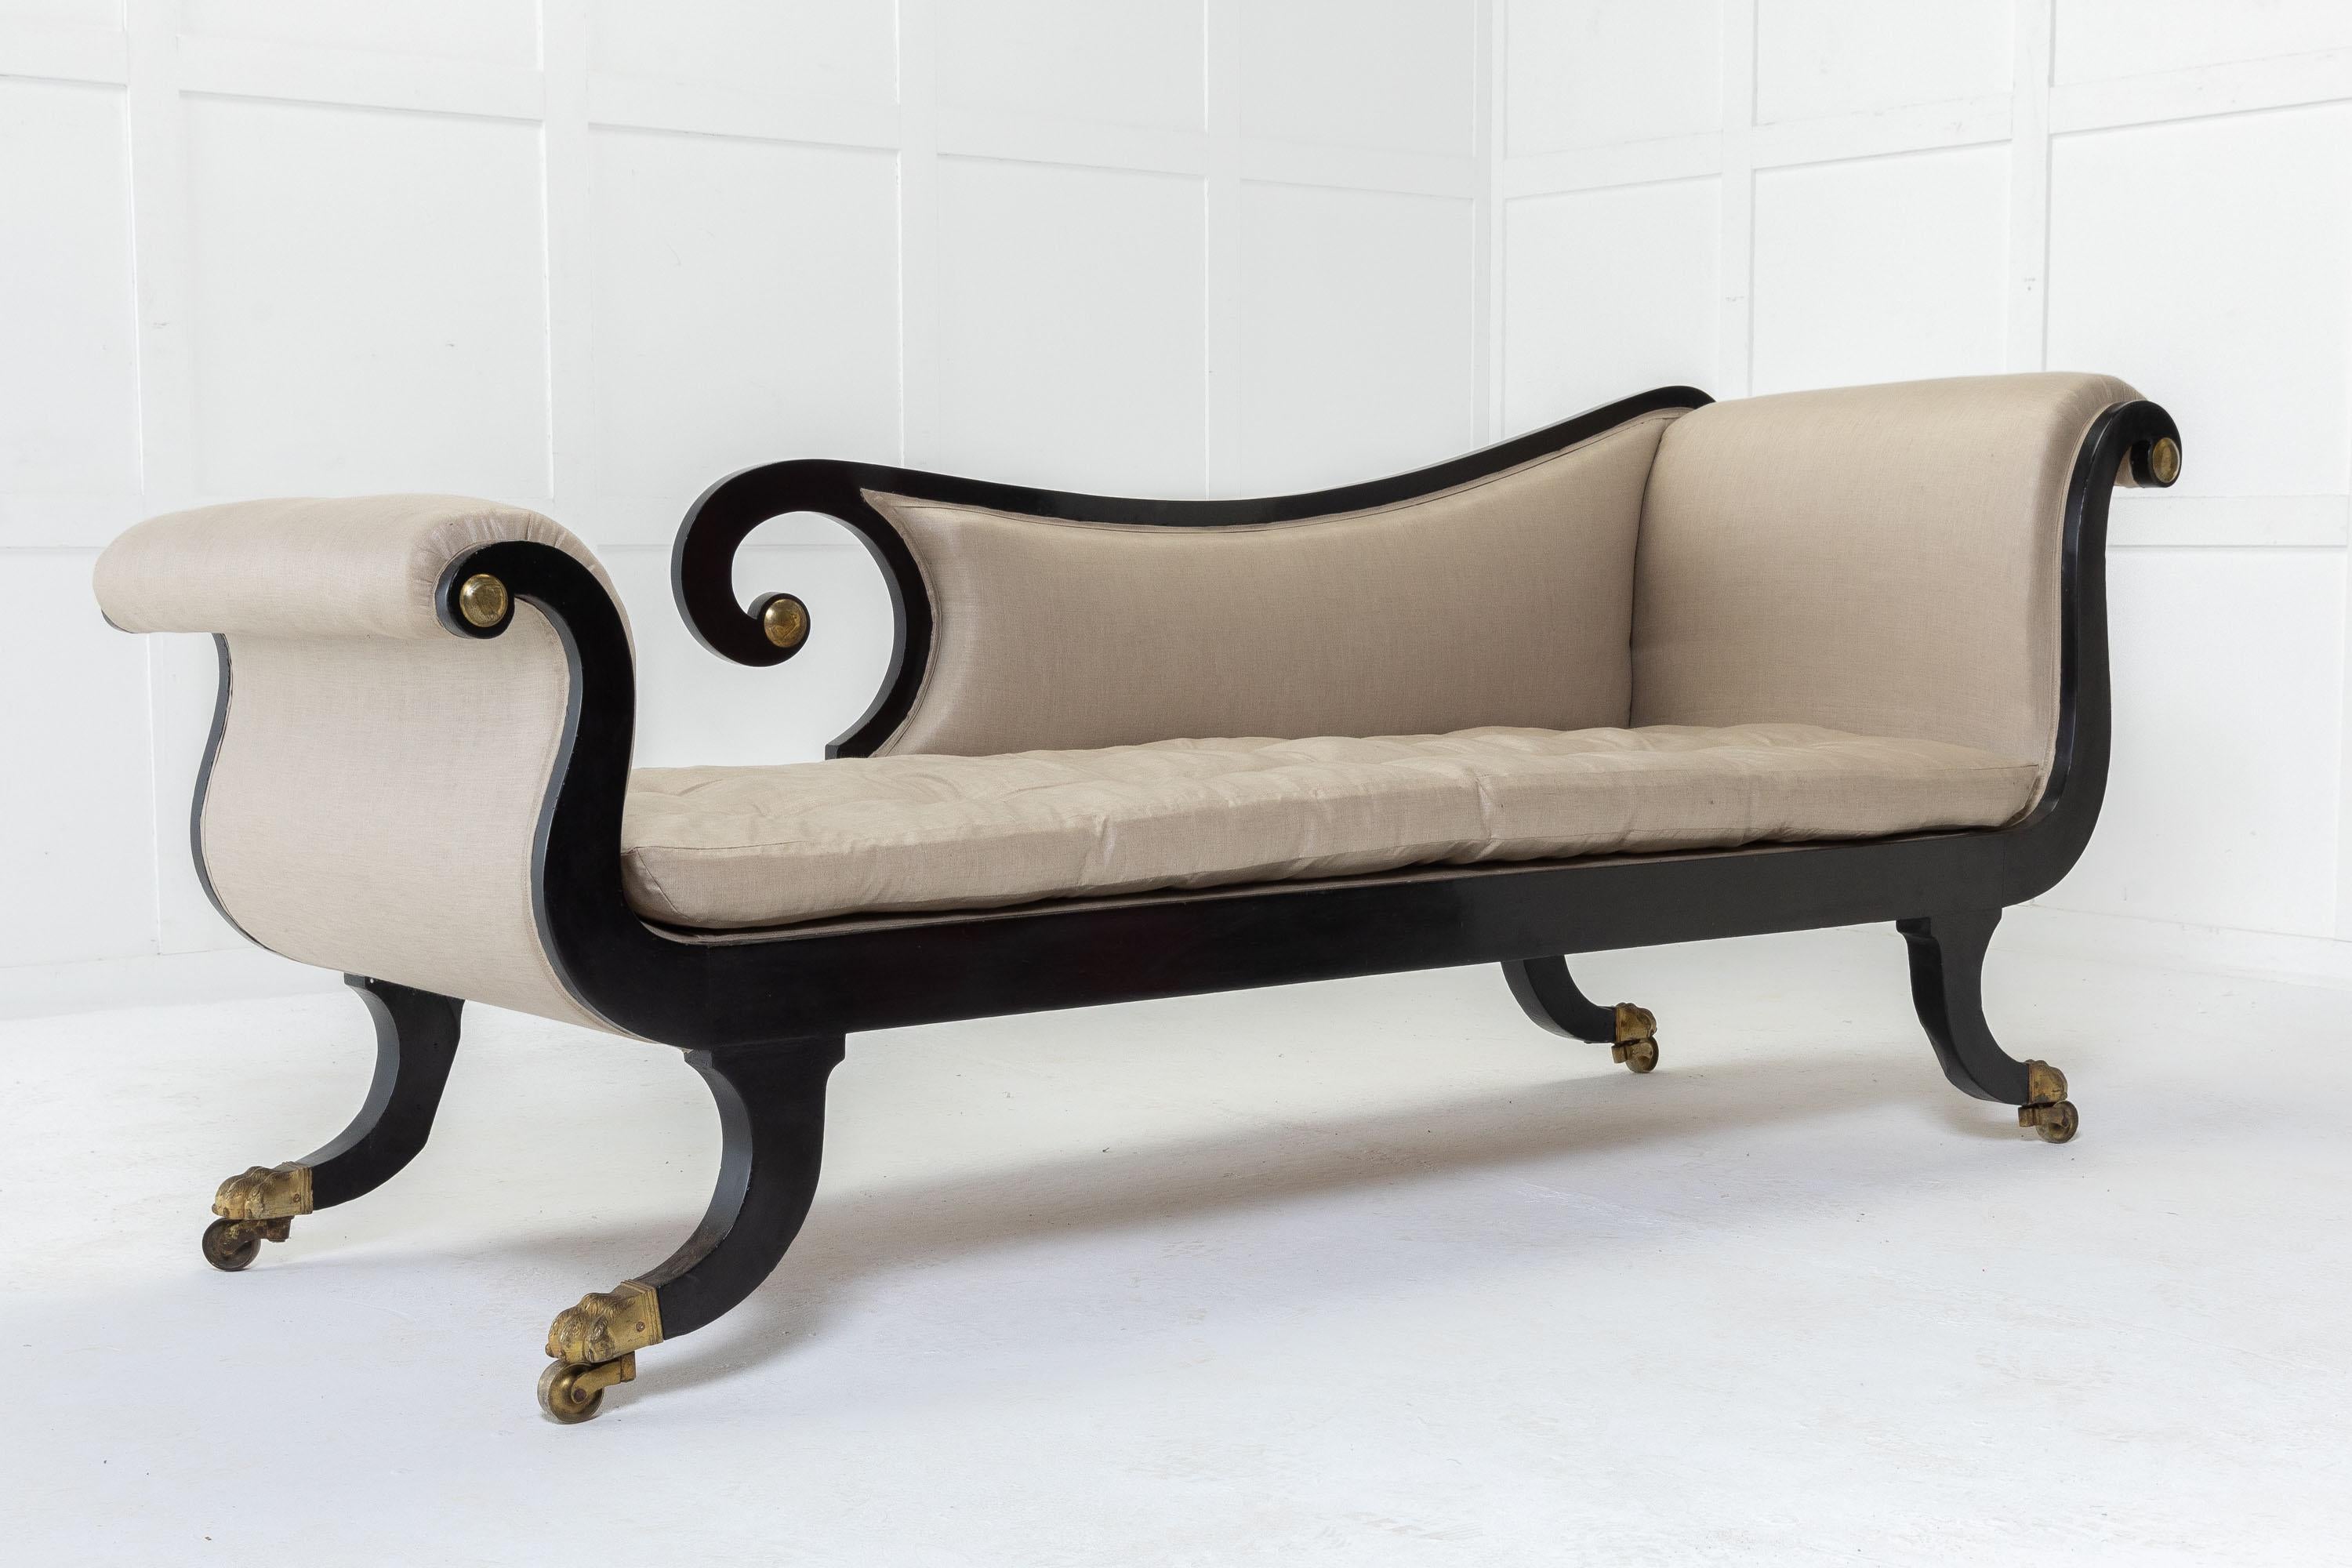 An attractive, English Regency elegantly shaped 19th Century chaise longue with flowing lines and nice proportions. Decorated with gilt on the scroll ends. Resting on well shaped sabre supports and brass castors.

Wonderful design and a very